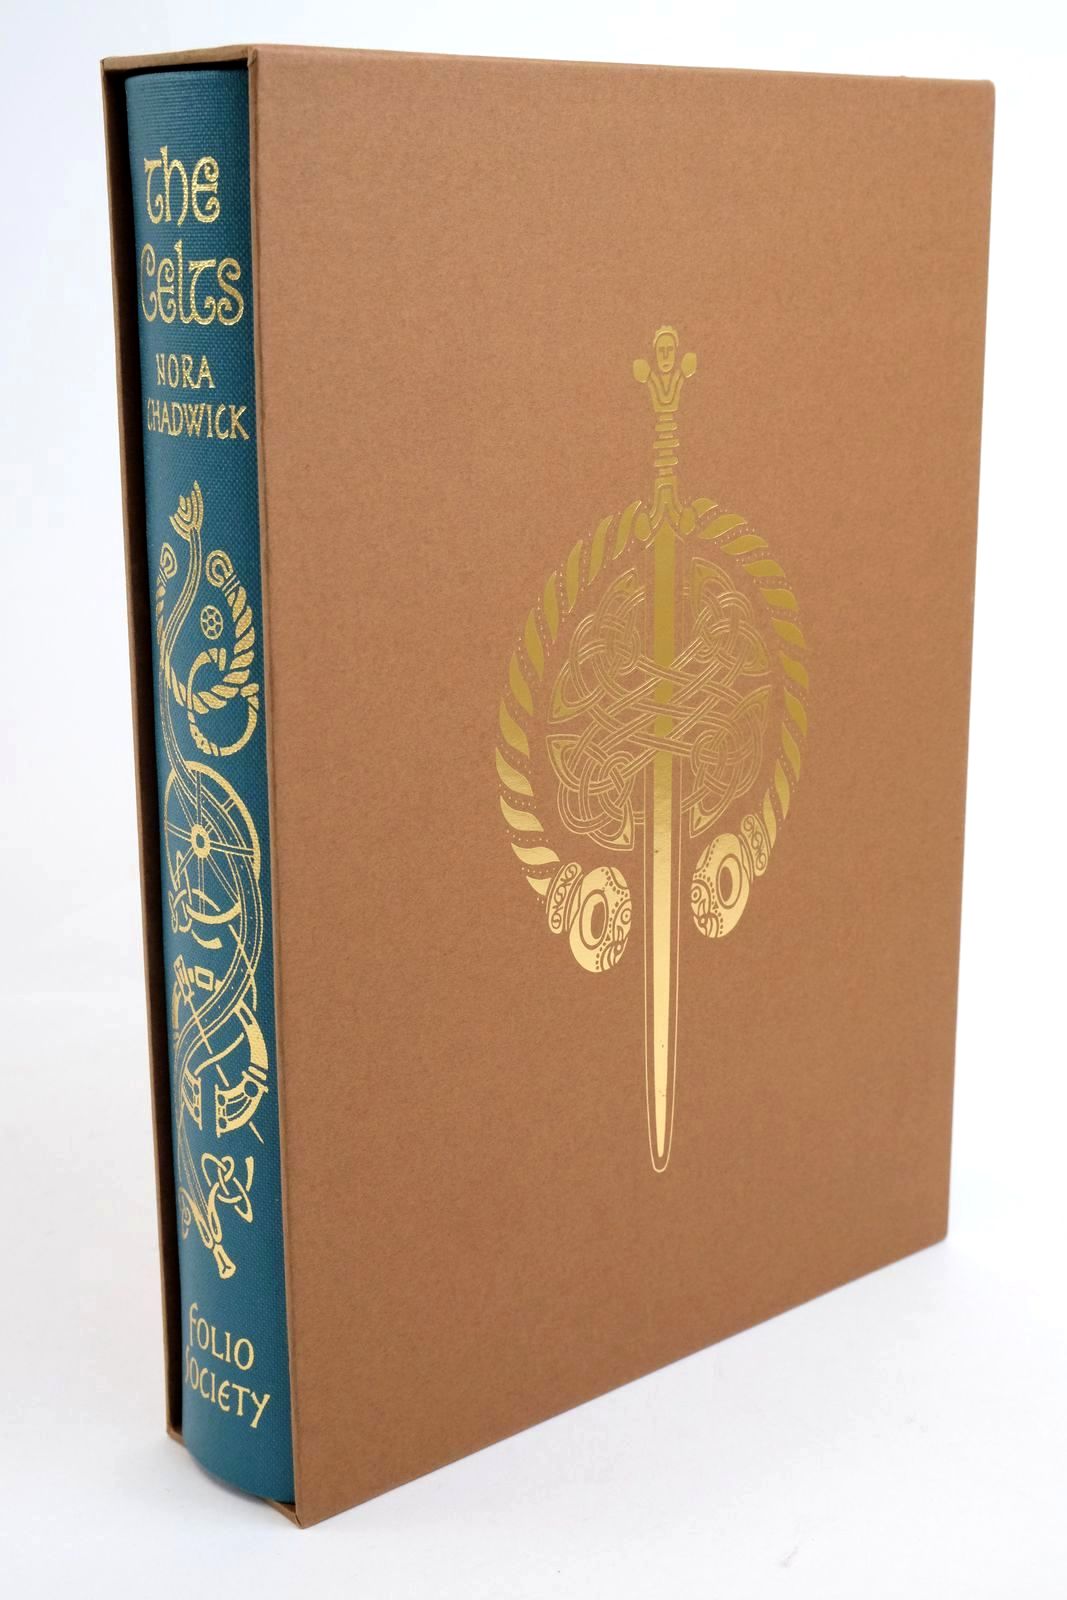 Photo of THE CELTS written by Chadwick, Nora K. Cunliffe, Barry published by Folio Society (STOCK CODE: 1322227)  for sale by Stella & Rose's Books